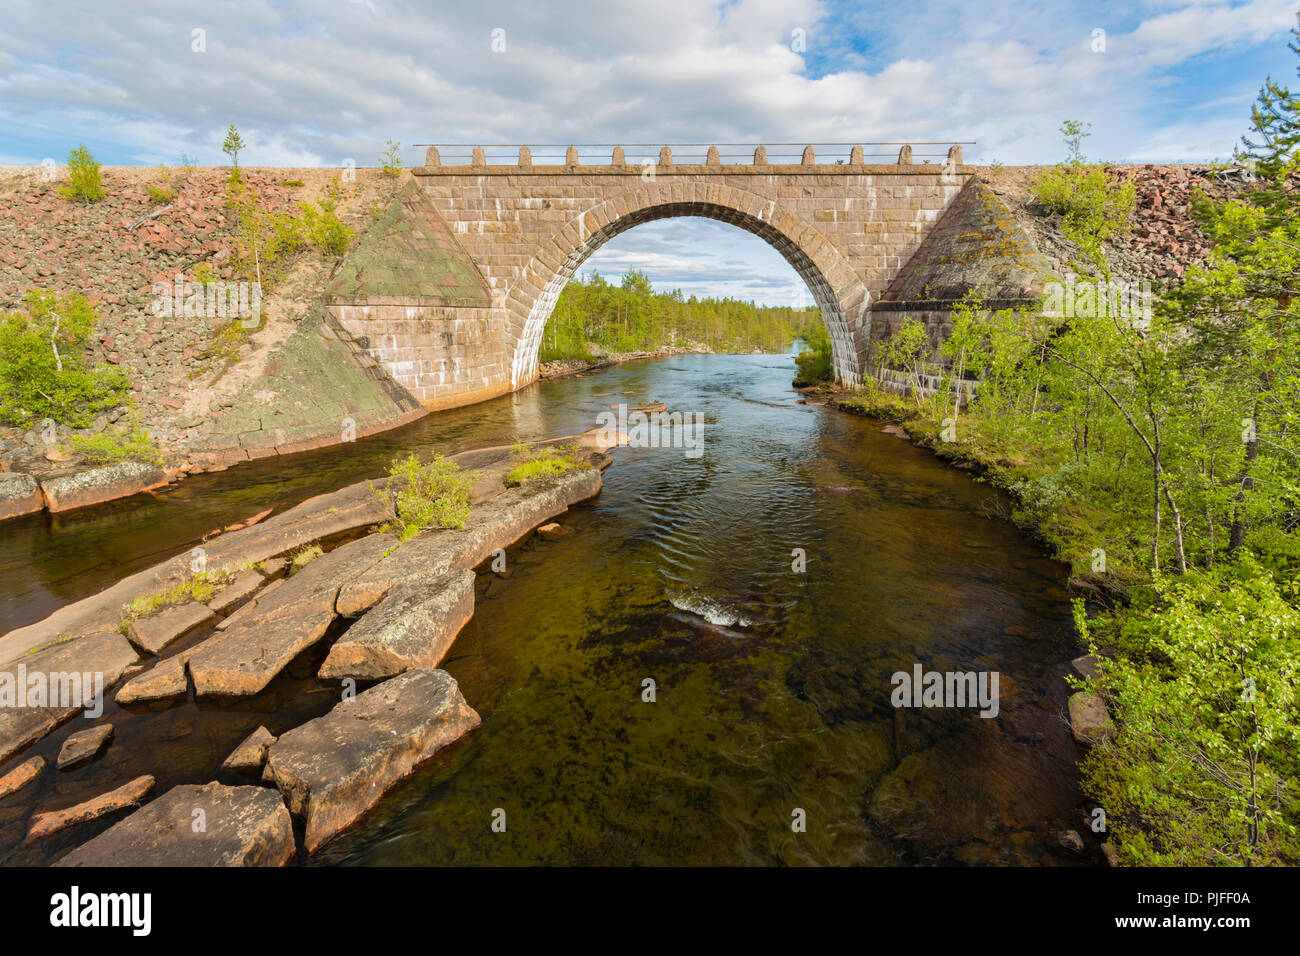 Old railroad bridge made of bricks with a portal, running water from river under it and forest in background, Jokkmokk county, Swedish Lapland, Sweden Stock Photo